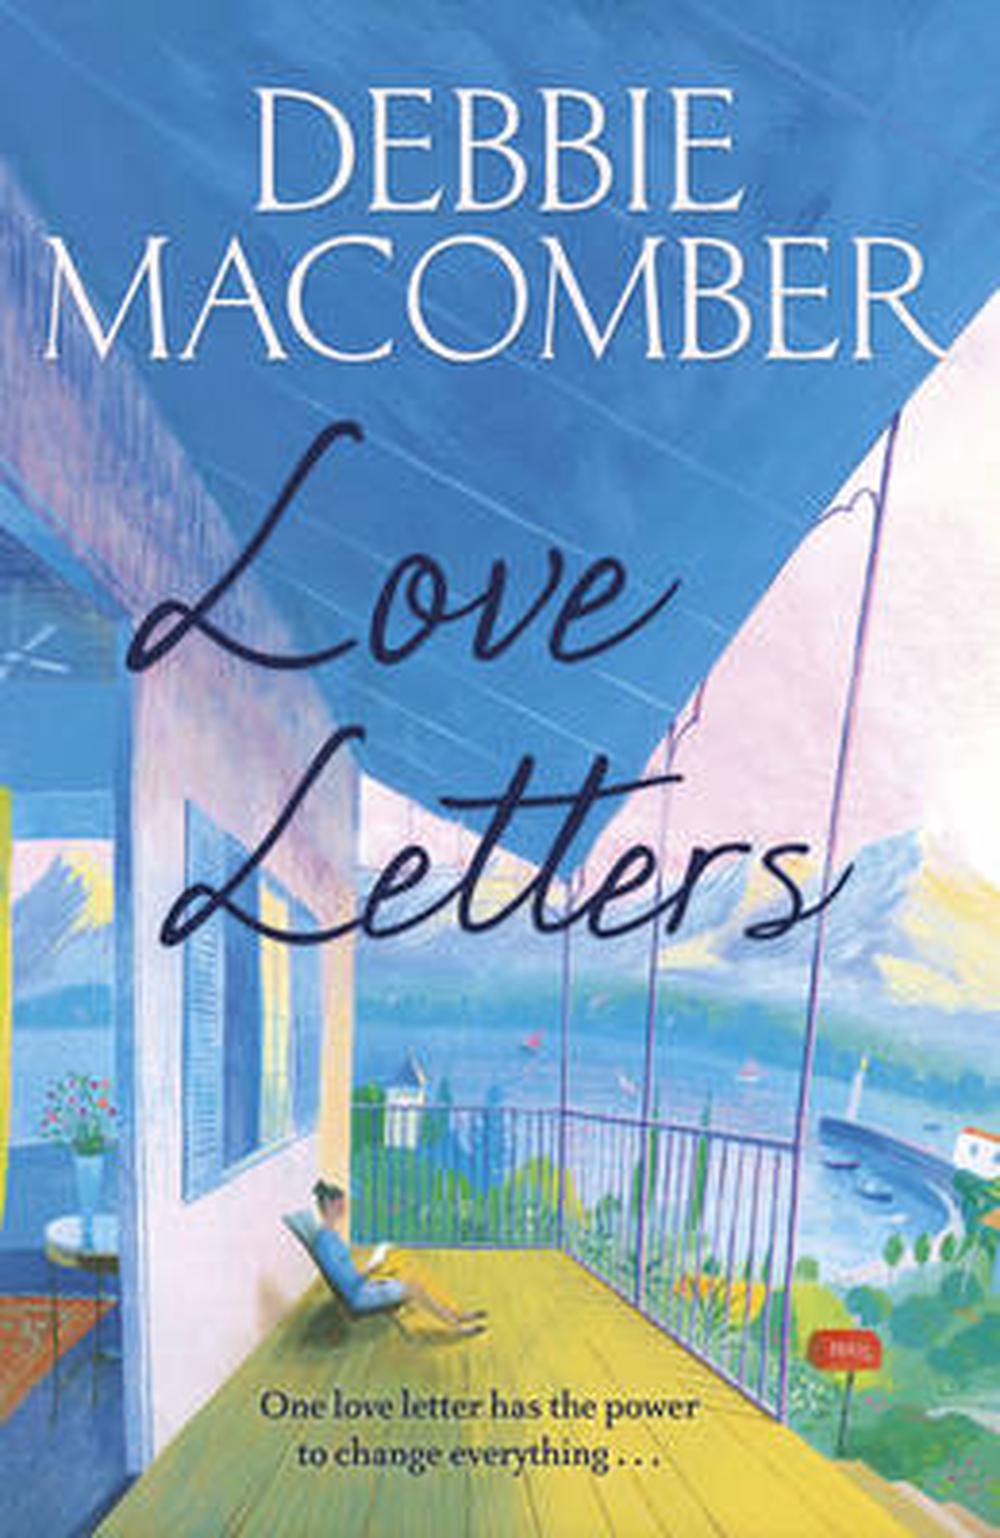 Love Letters by Debbie Macomber